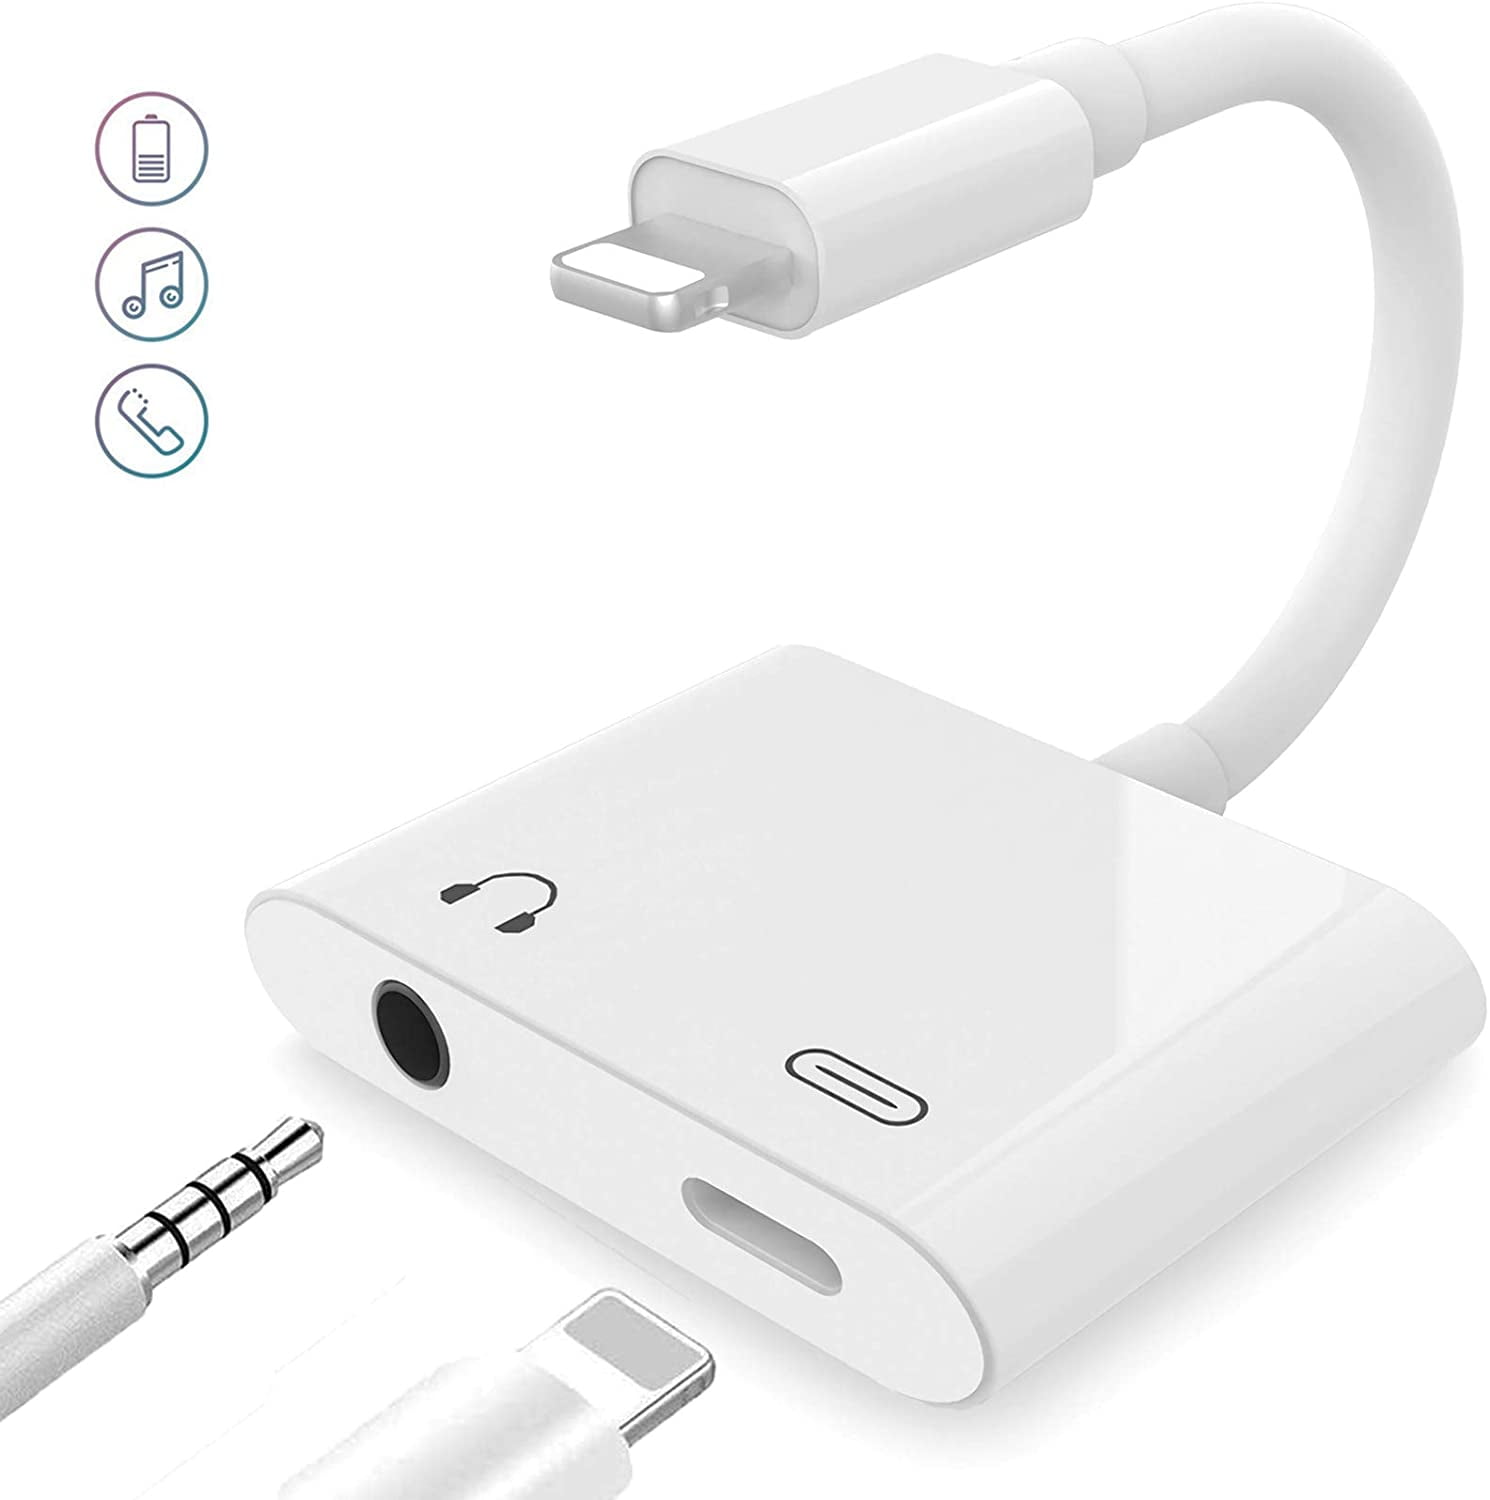 Adapter for iPhone 7 Headphone Adaptor to 3.5mm Converter Earphone for iPhone X/Xs/XS max/8/8 Plus 7/7 Plus Headphone Cable Splitter Audio Jack Headphone Cable Earbud Adapter Support iOS 12 or Later